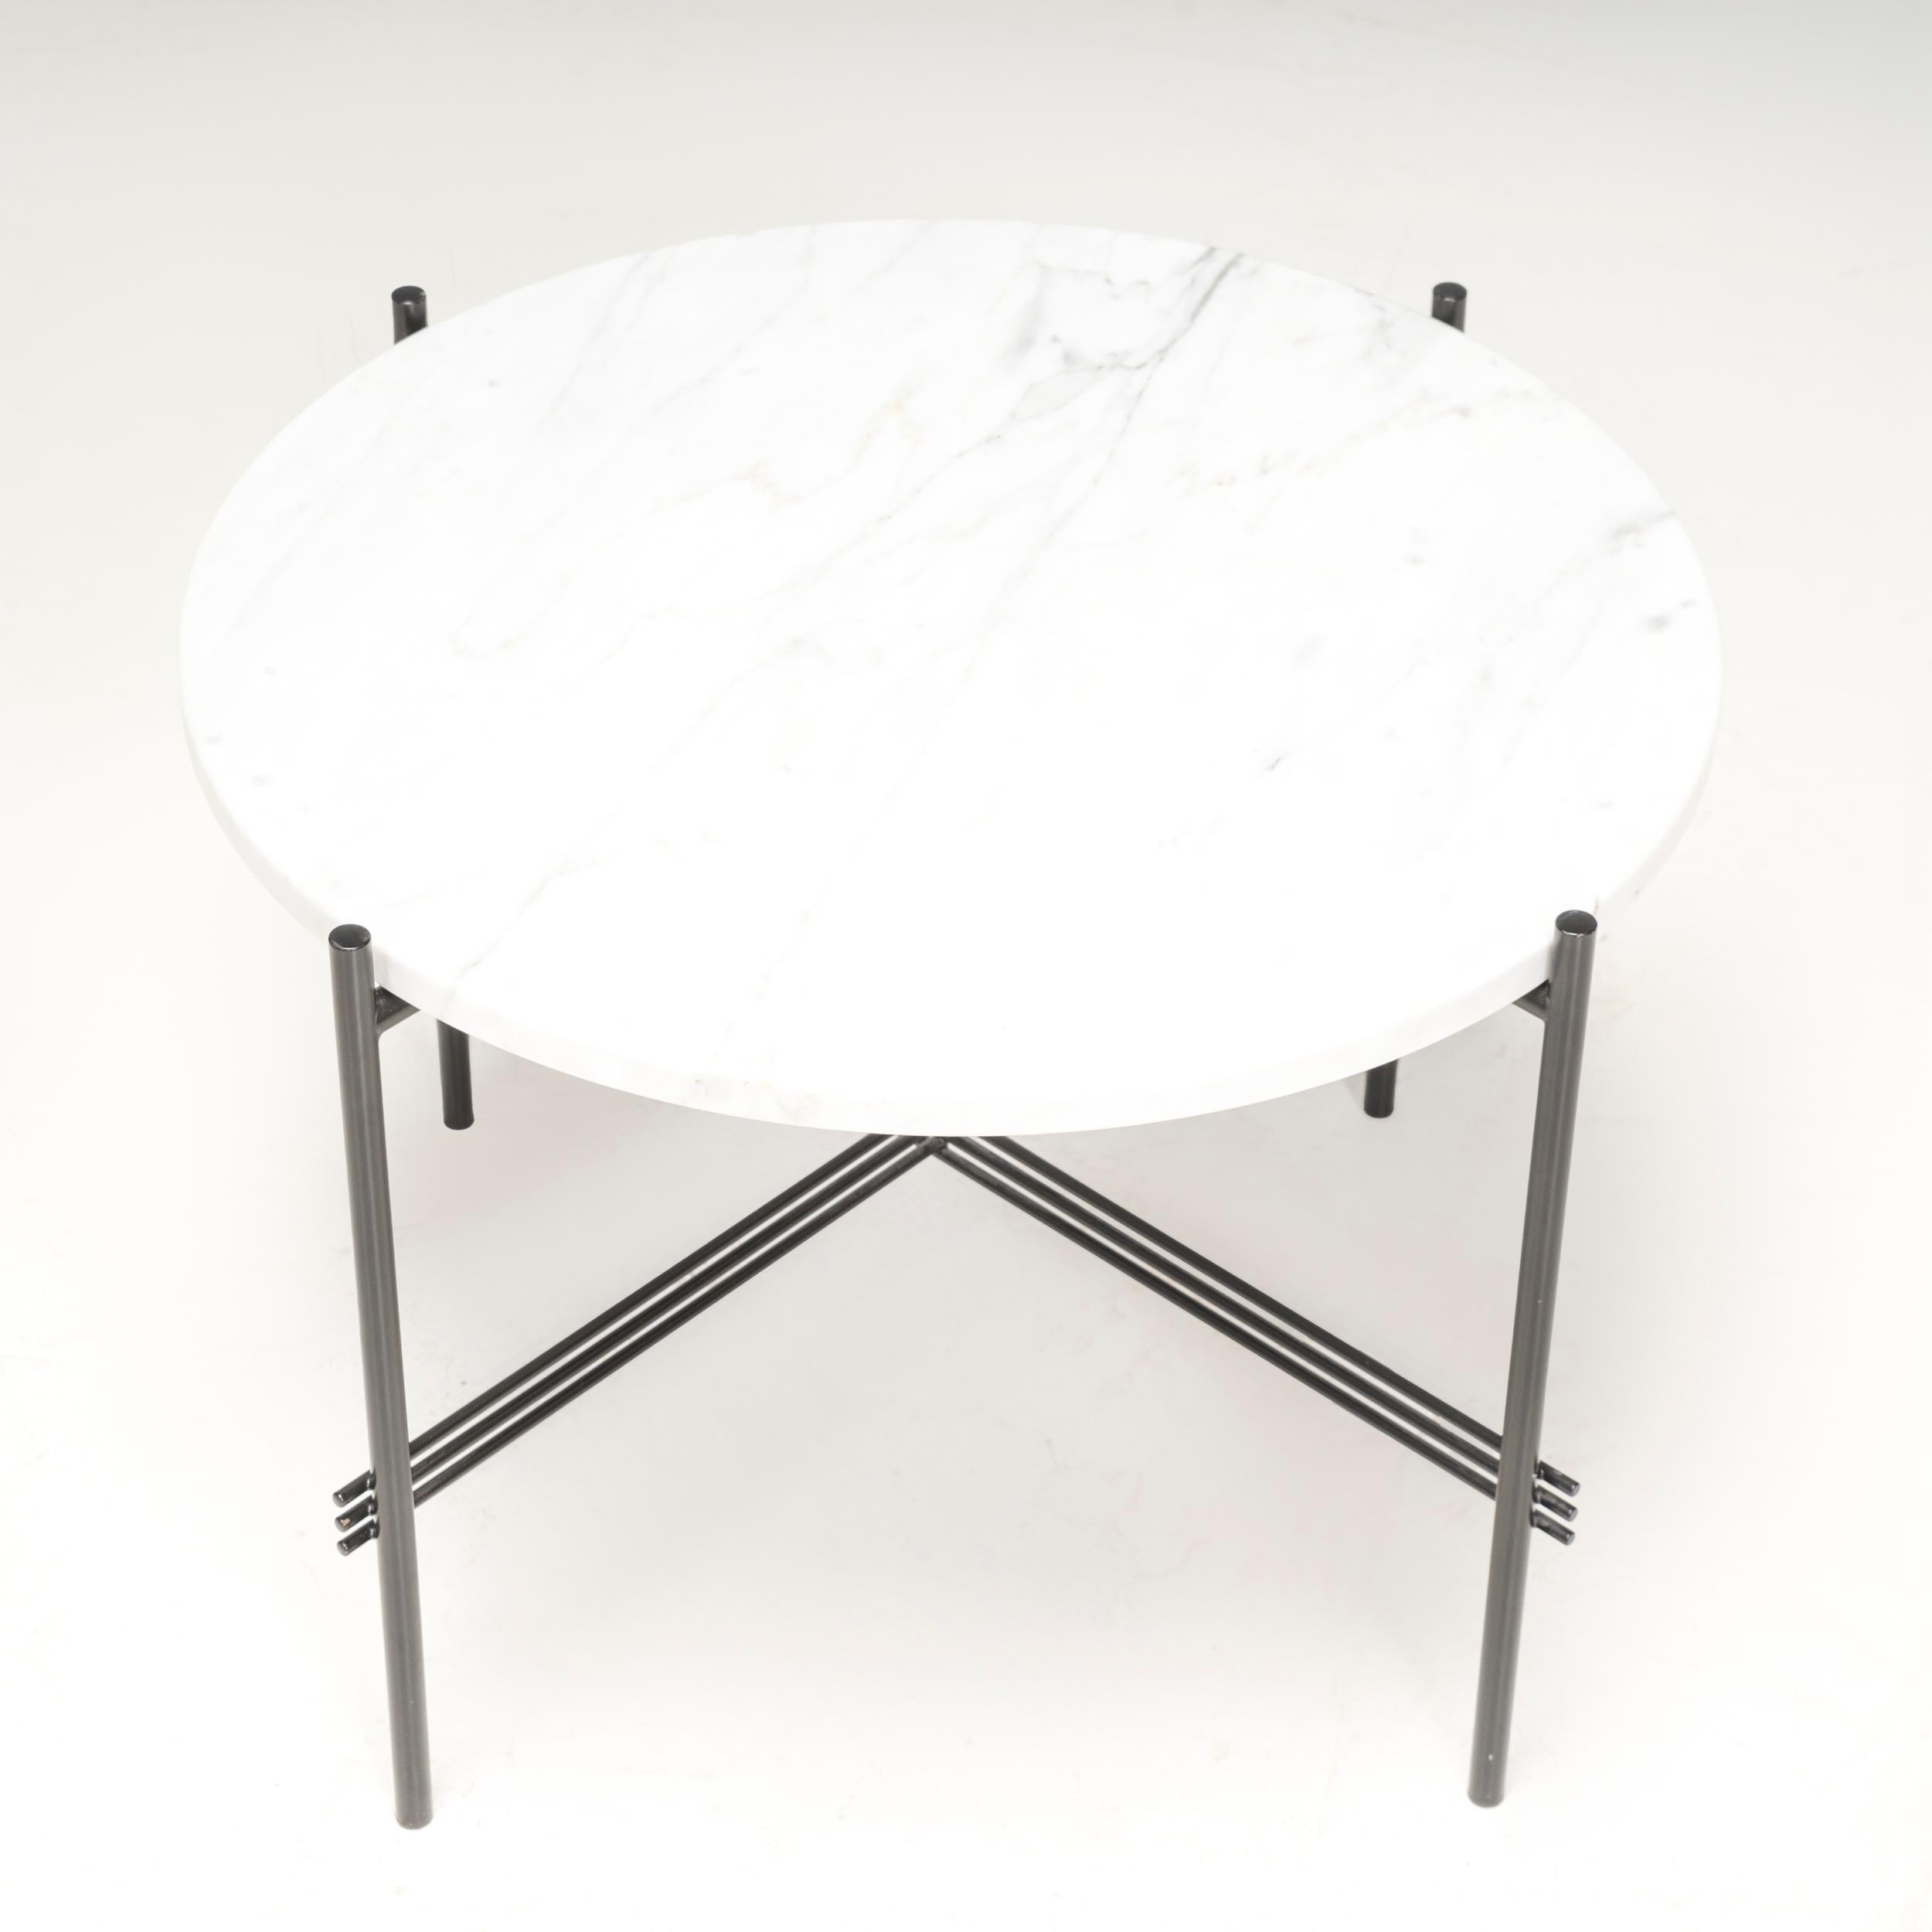 The TS table, short for “the standard” is a new table series that gets it inspiration from the 1930s architecture of an eponymous building in Copenhagen. Today, this art deco building, stands as a perfect example of International functionalism for